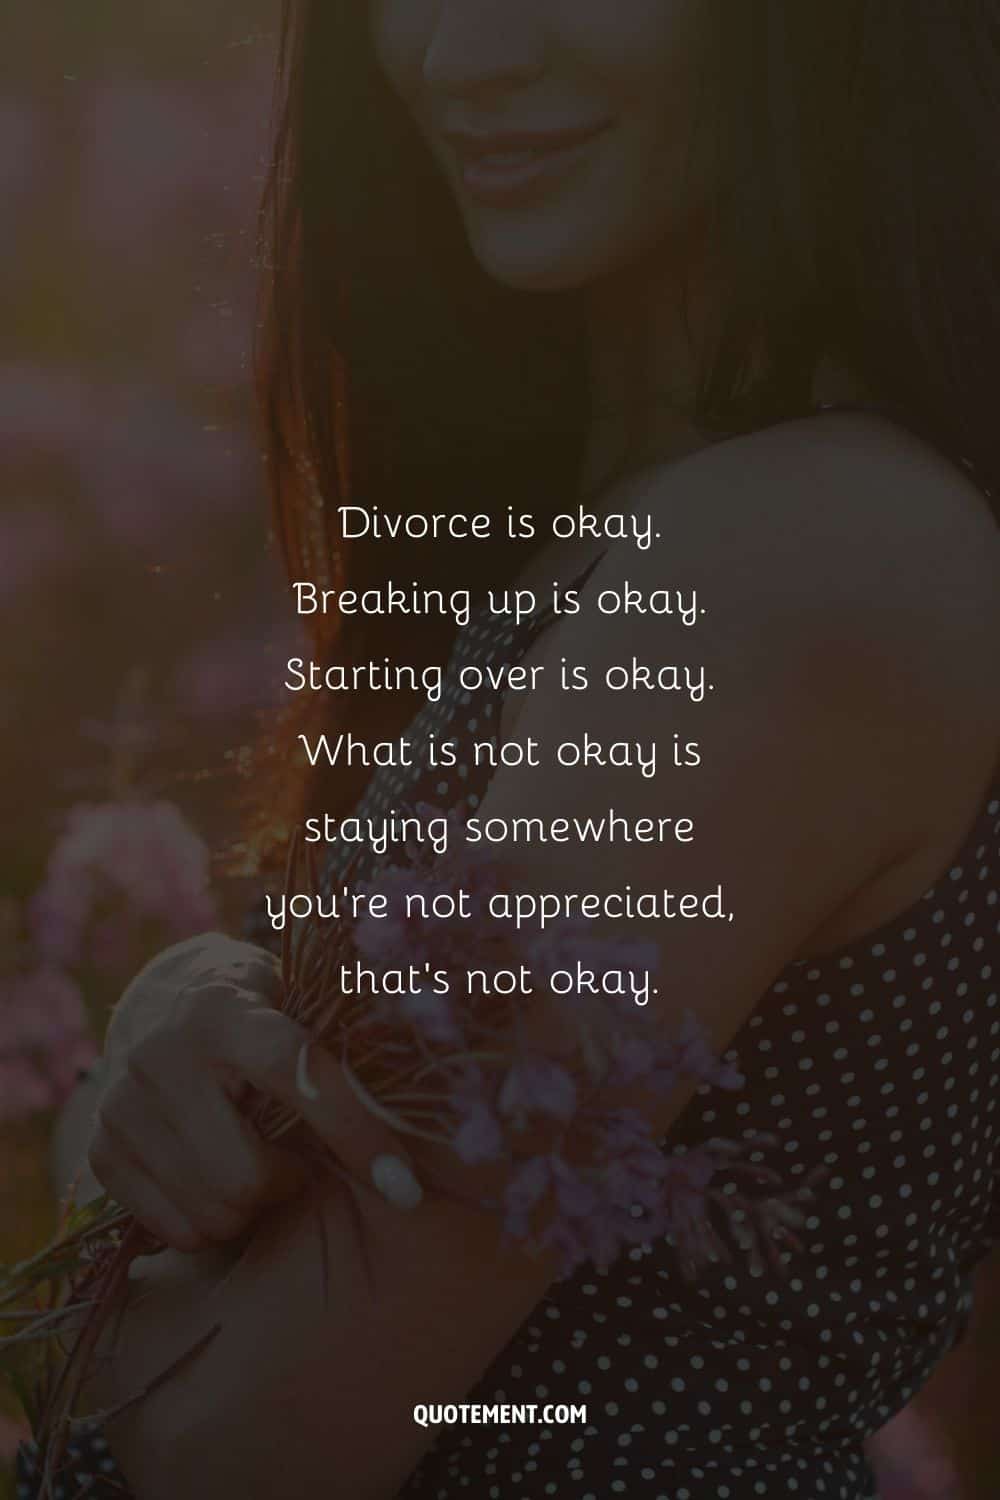 girl with flowers representing quote for starting over after a breakup